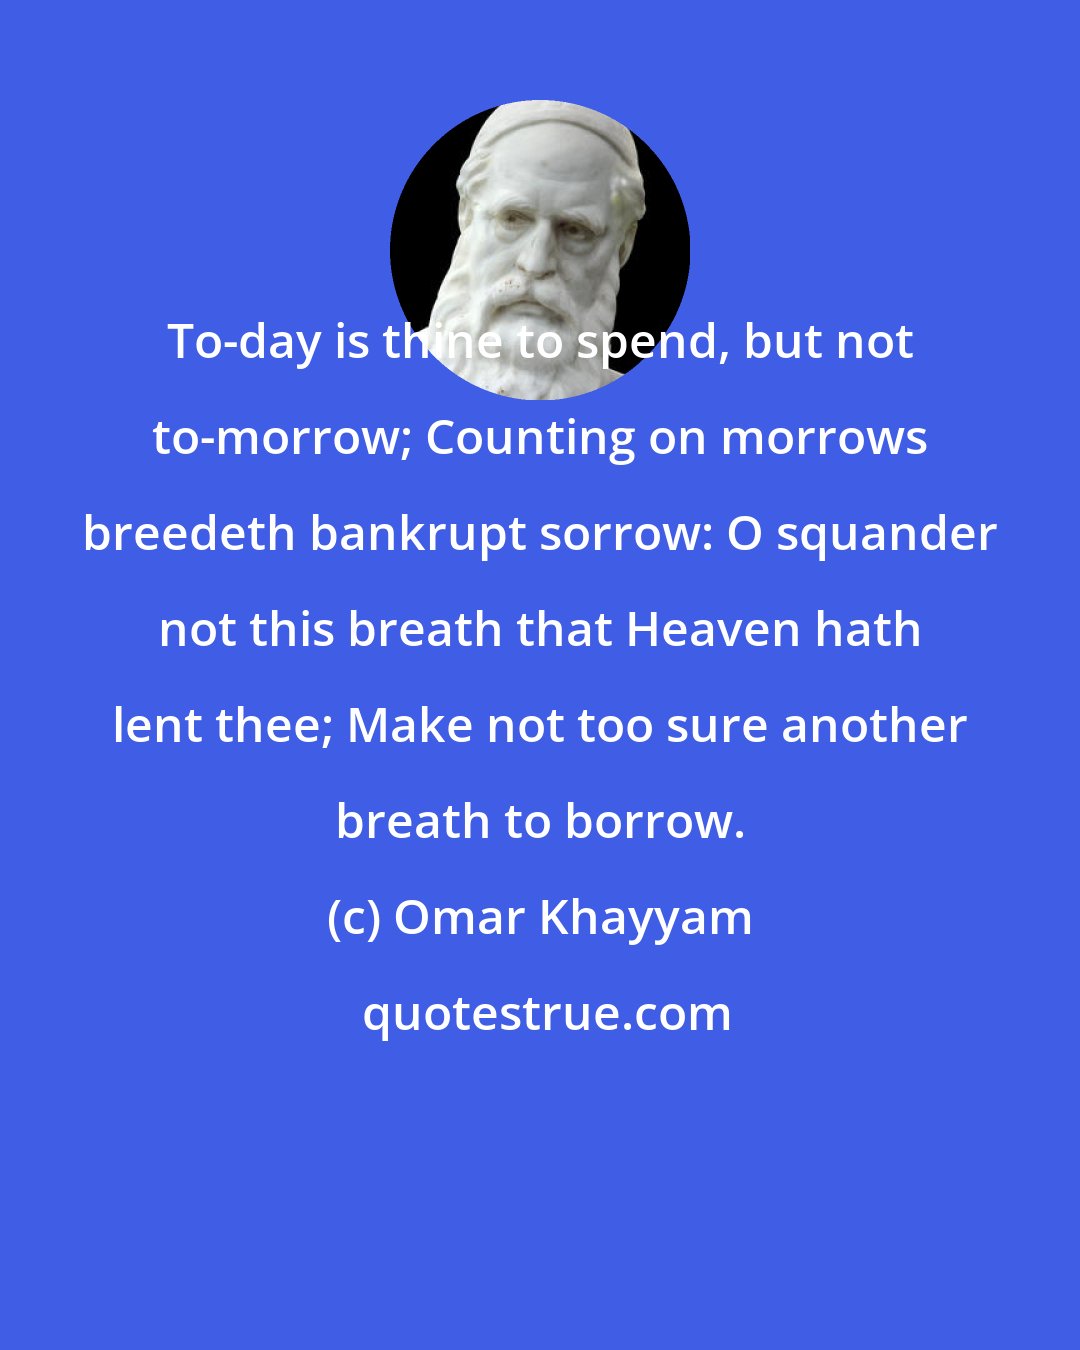 Omar Khayyam: To-day is thine to spend, but not to-morrow; Counting on morrows breedeth bankrupt sorrow: O squander not this breath that Heaven hath lent thee; Make not too sure another breath to borrow.